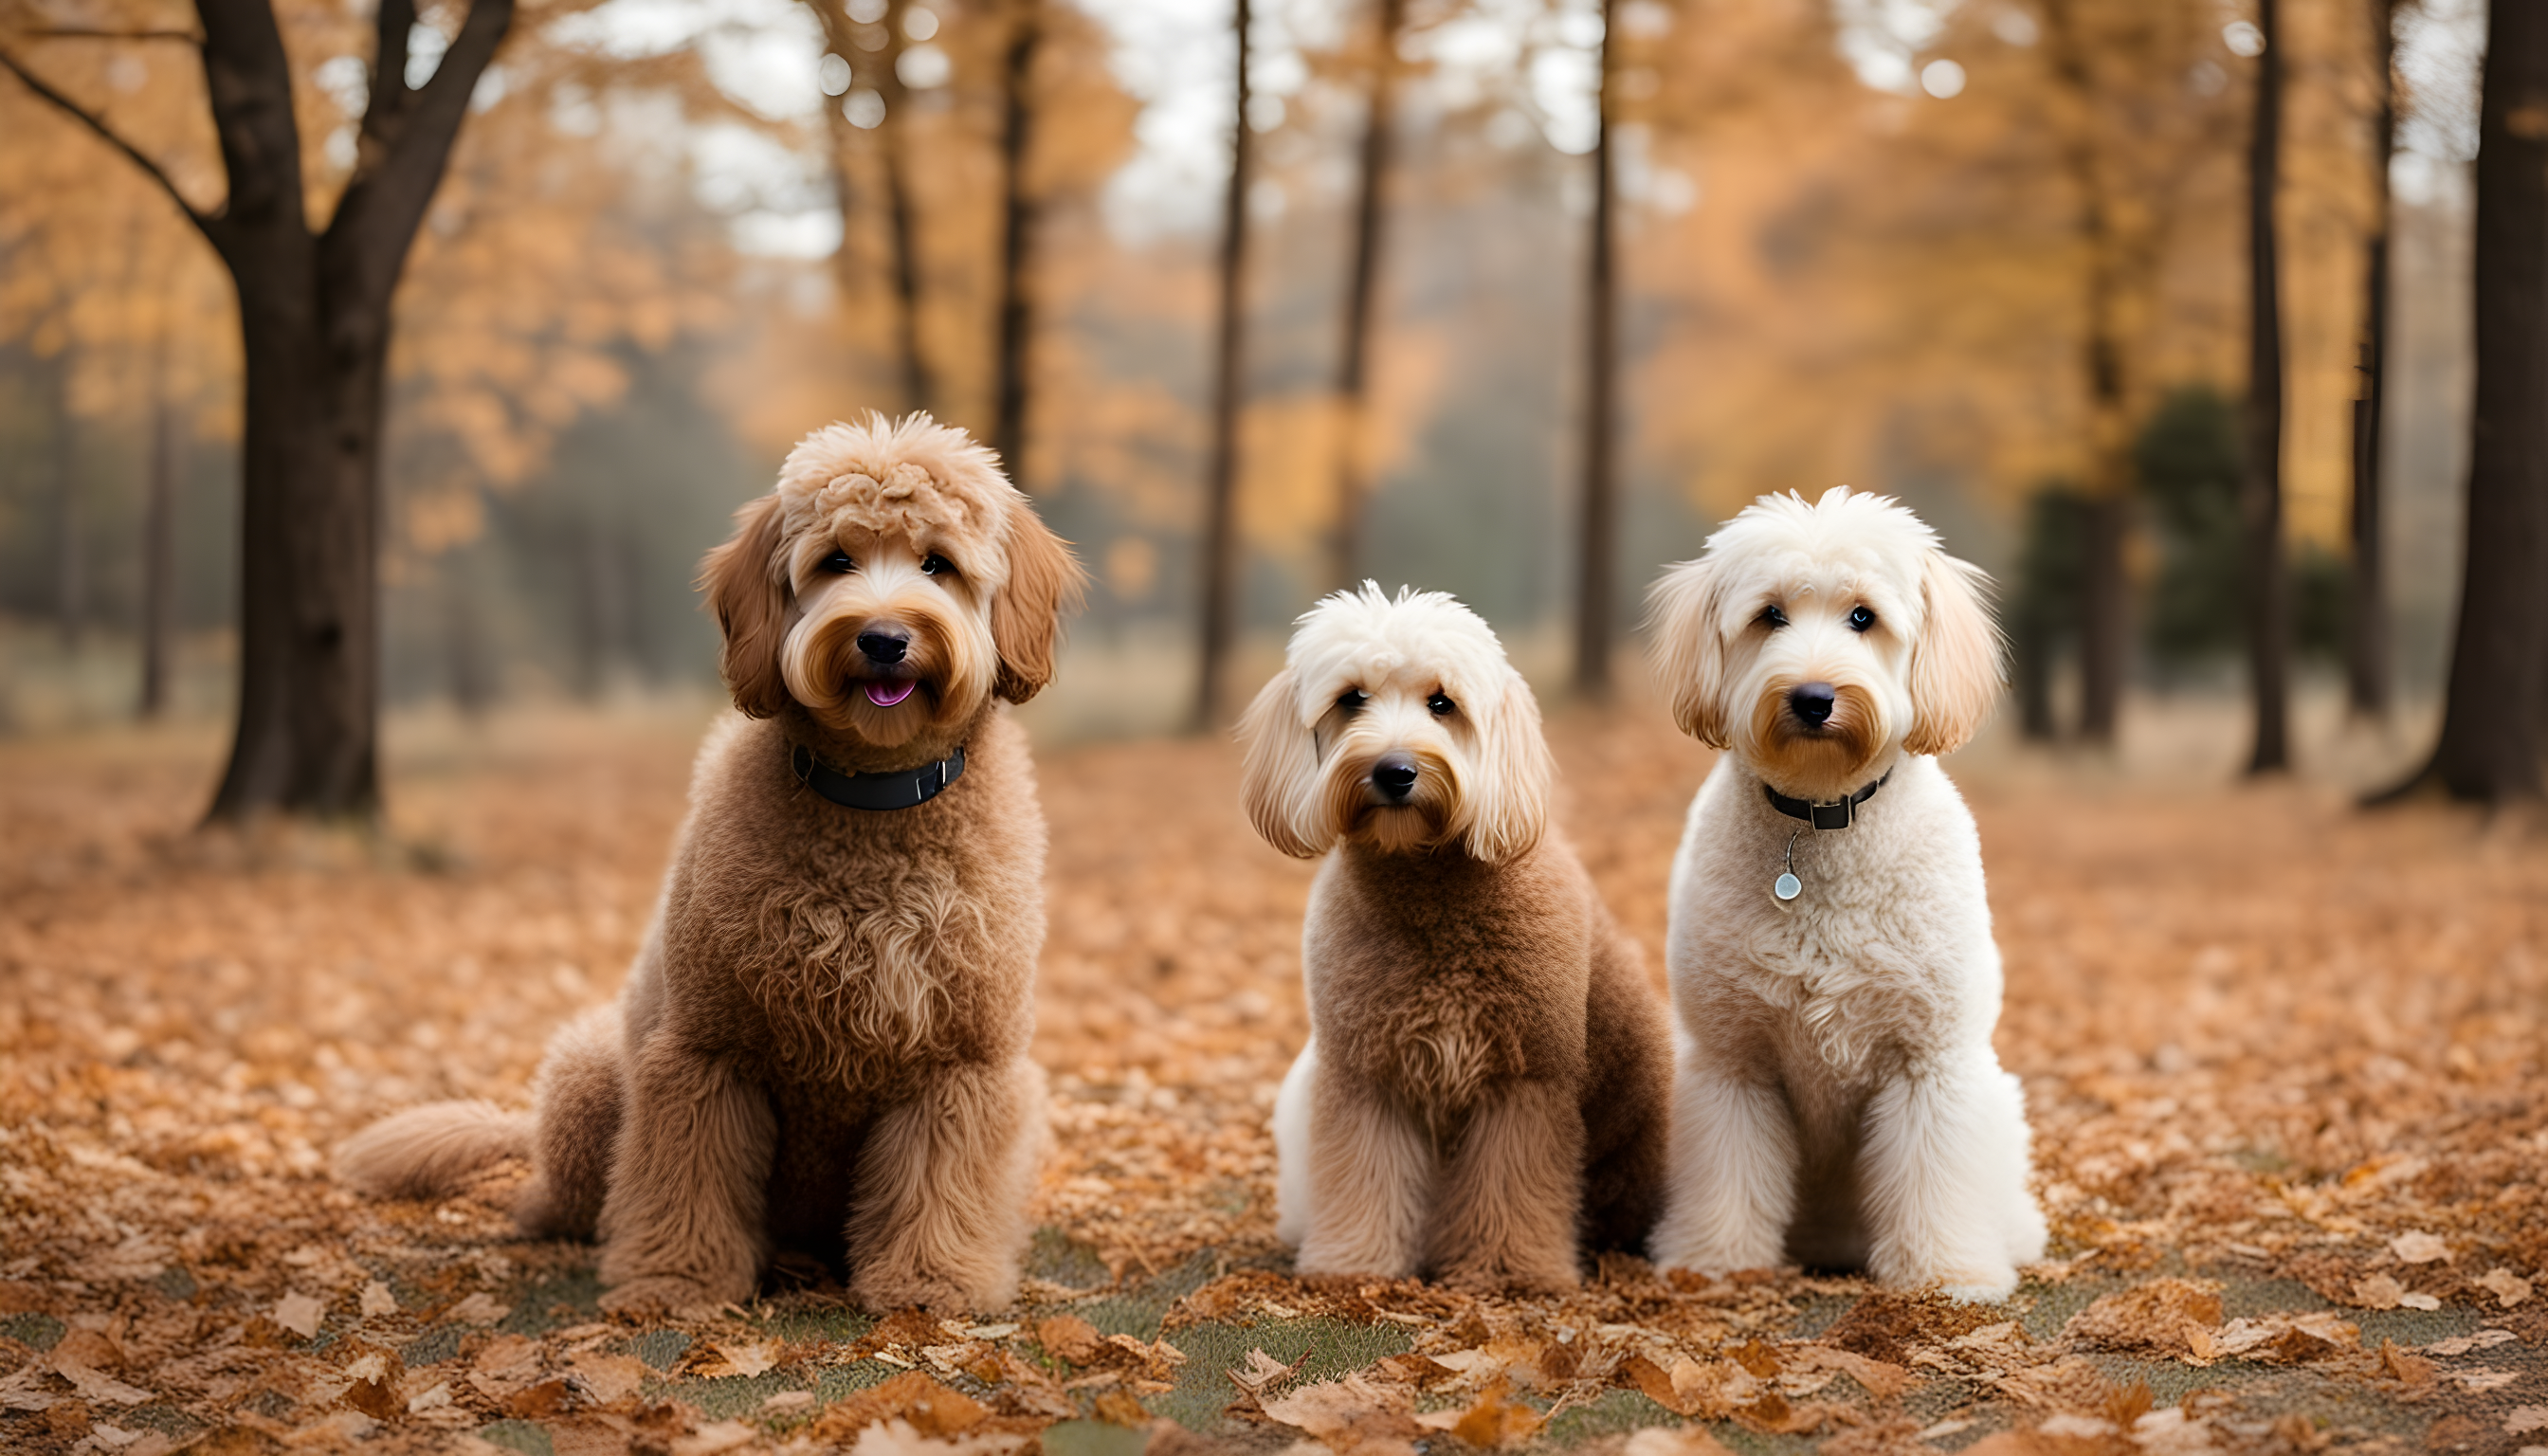 A Labradoodle with a wool coat and another with a hair coat standing side by side, as if posing for a 'Who's more hypoallergenic?' contest